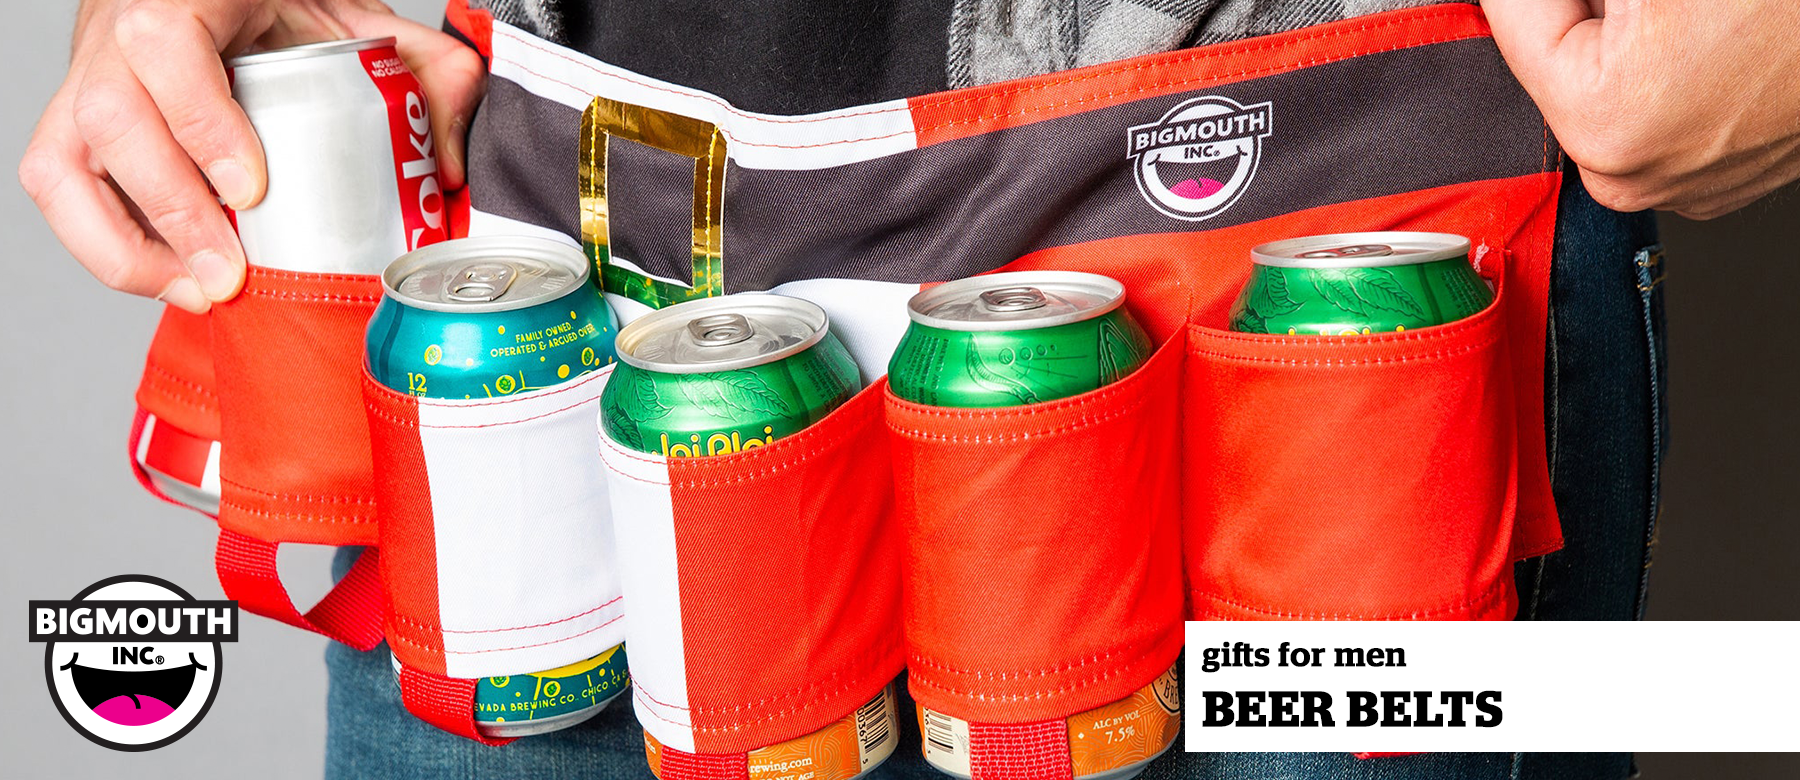 Craft Beer Gifts | Beer Gifts | Gifts for Men